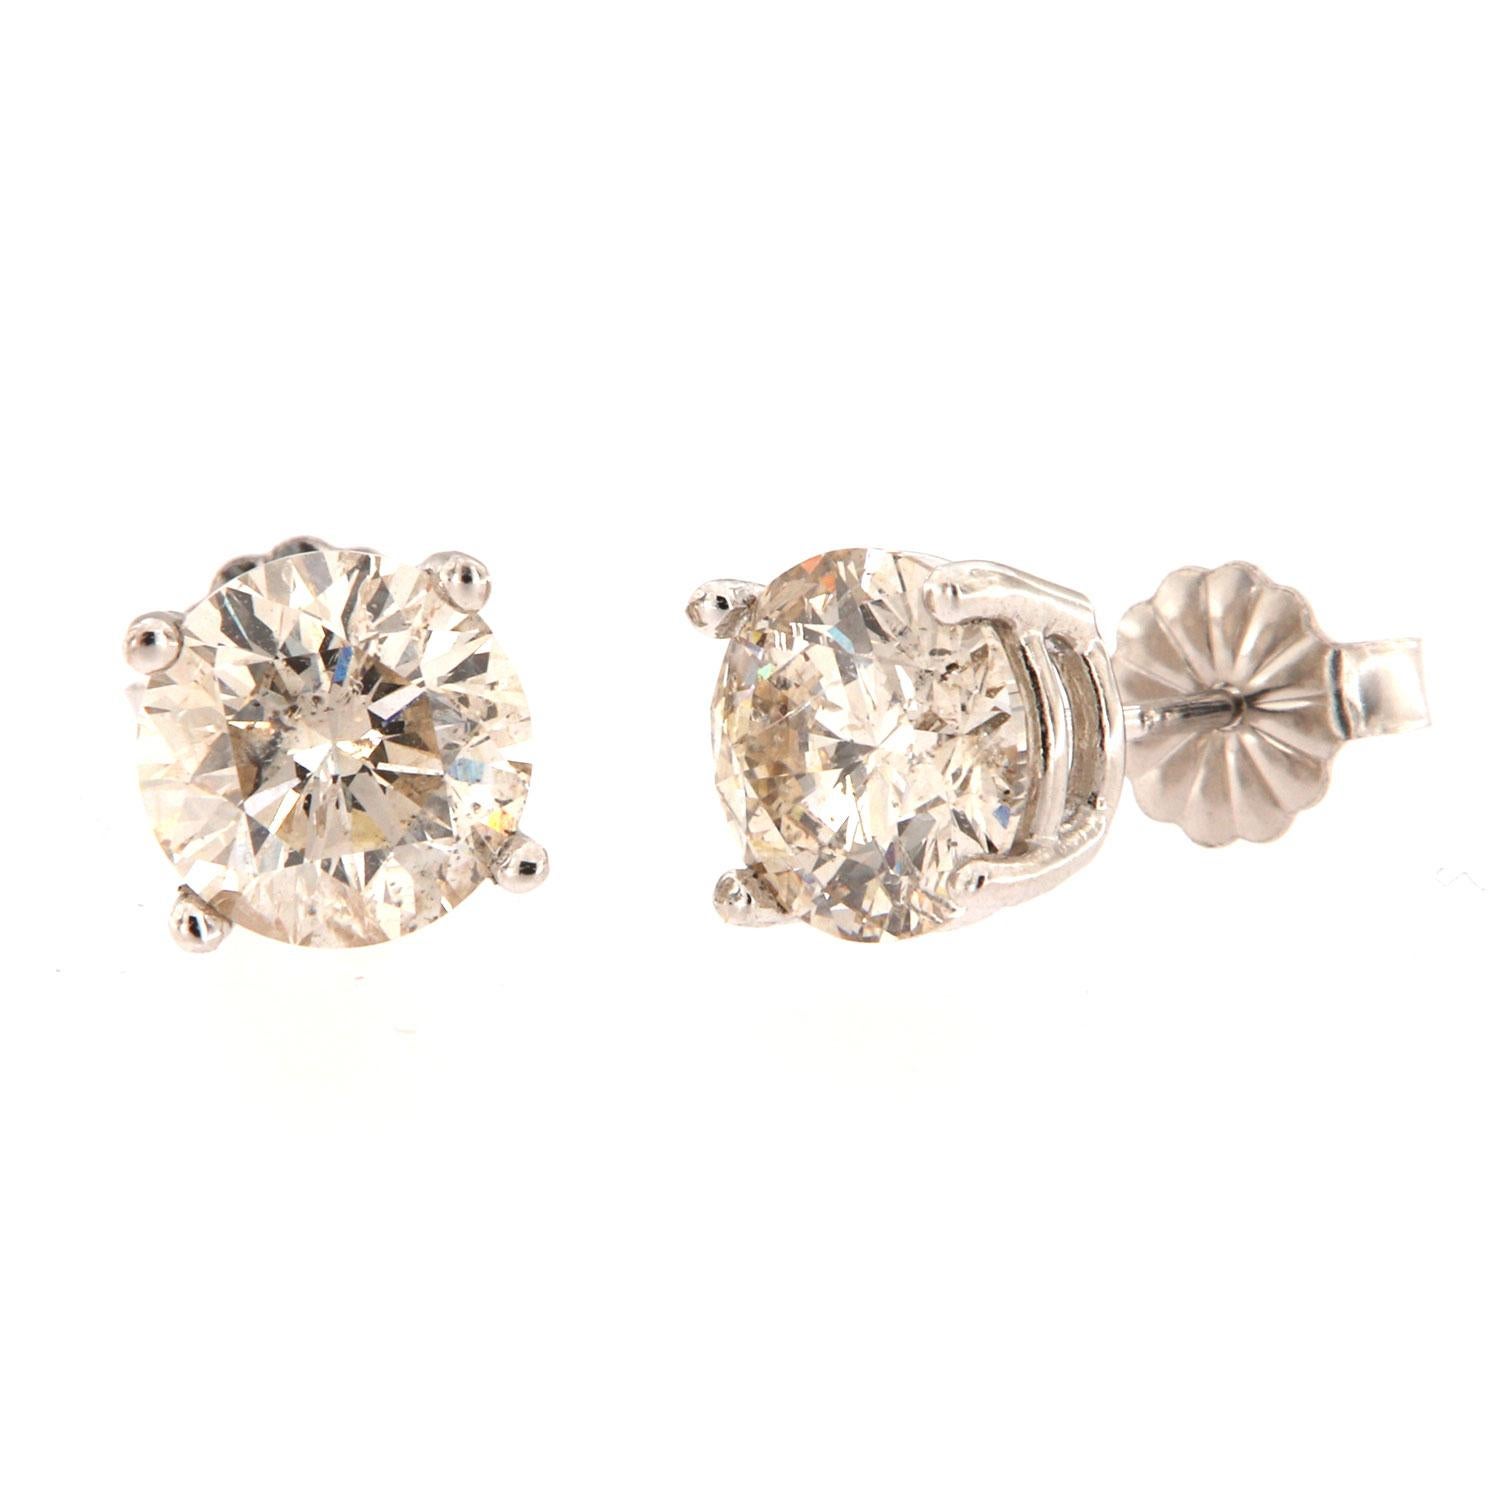 These 14k White gold studs feature two perfectly matched brilliant round diamonds in a total weight of 3.17 carat ( 1.58+1.59 each) Four (4) pongs basket settings. 

Average Color: 